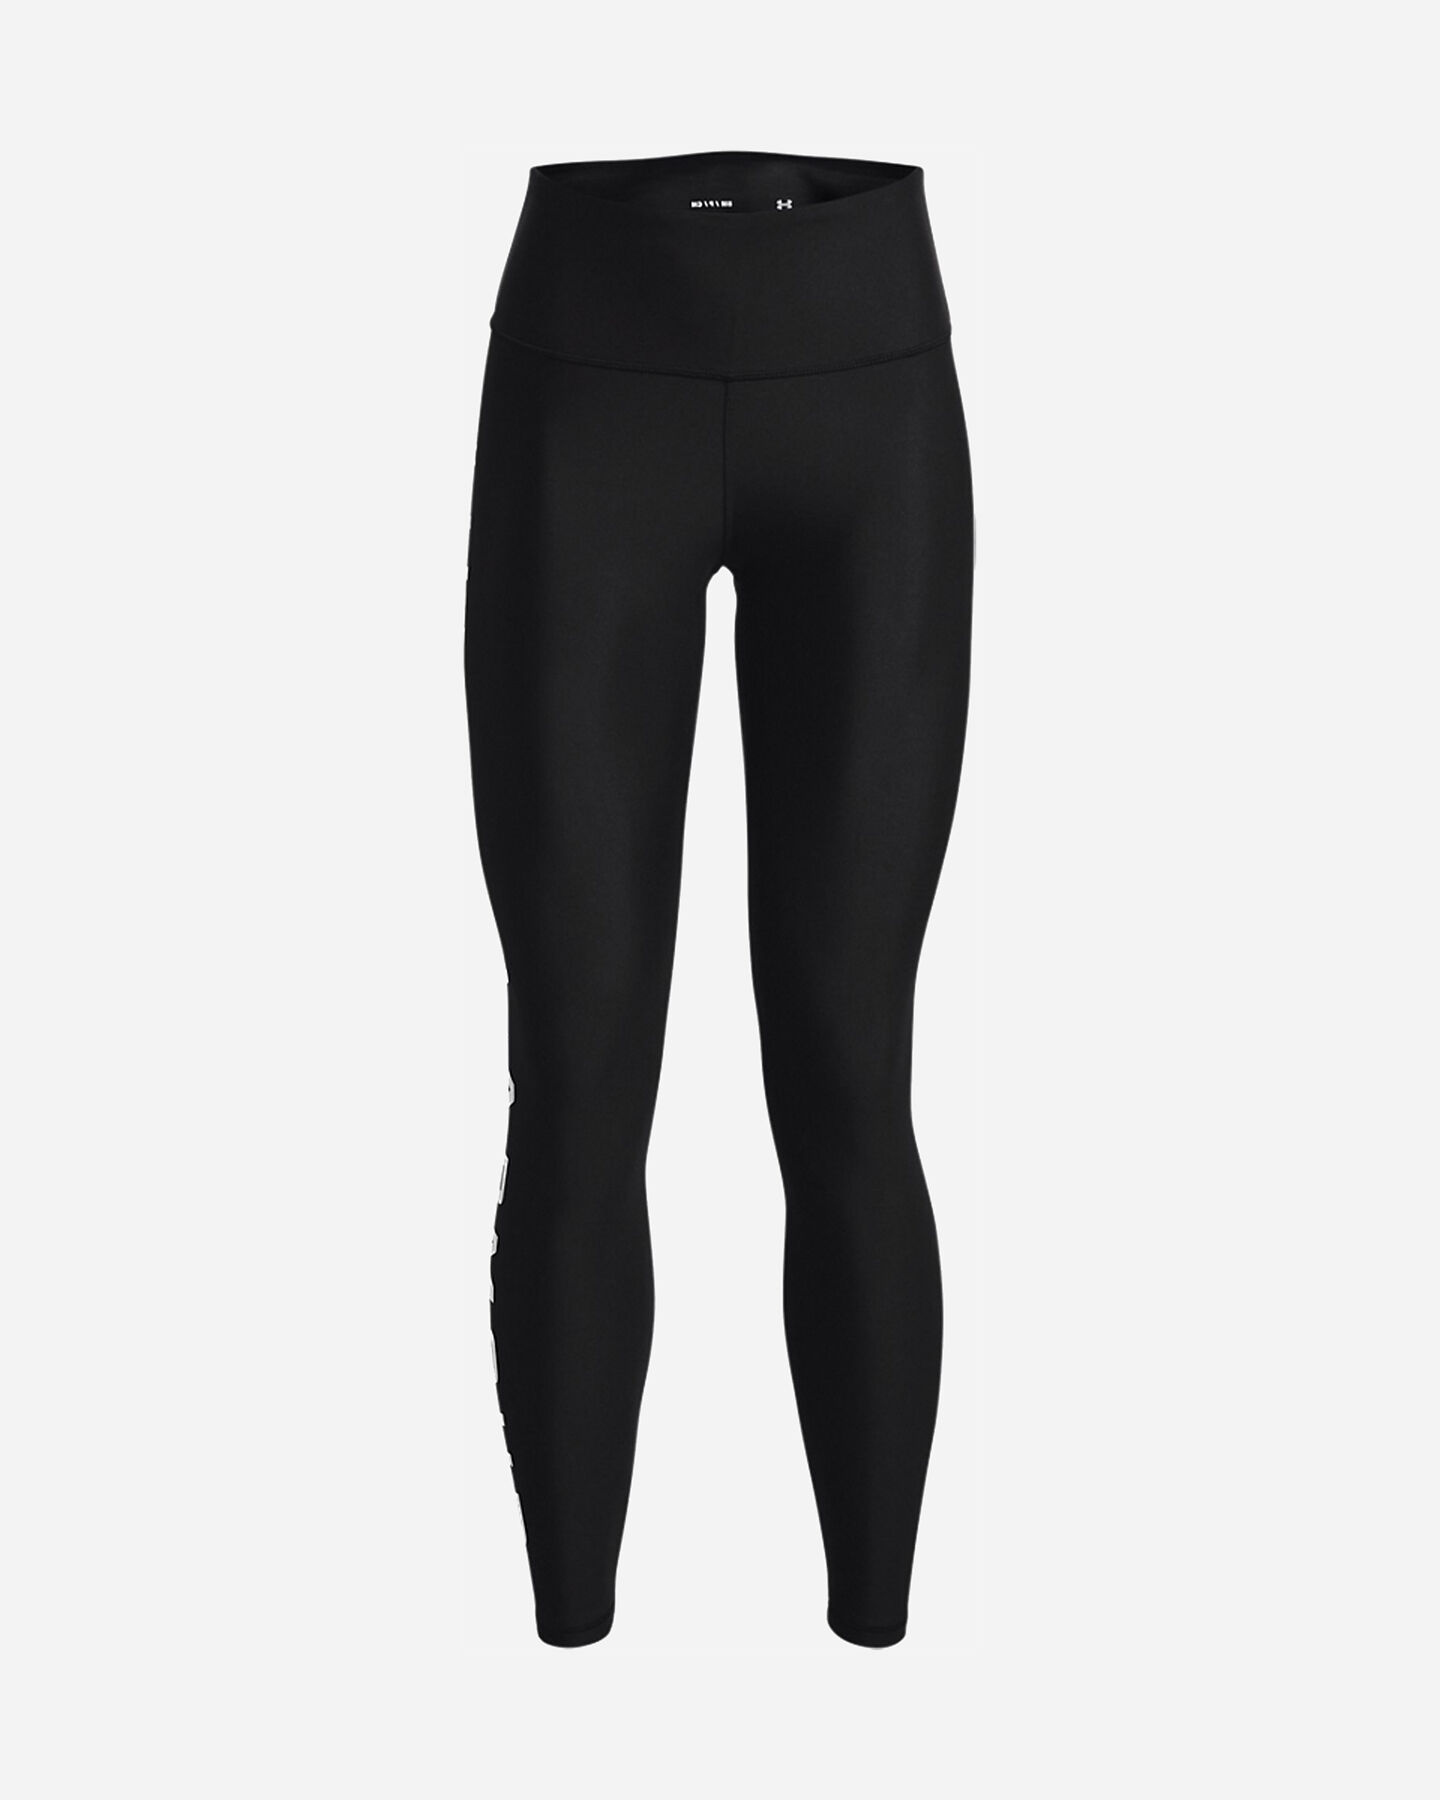  Leggings UNDER ARMOUR LATERAL LOGO W S5287029|0001|XS scatto 0